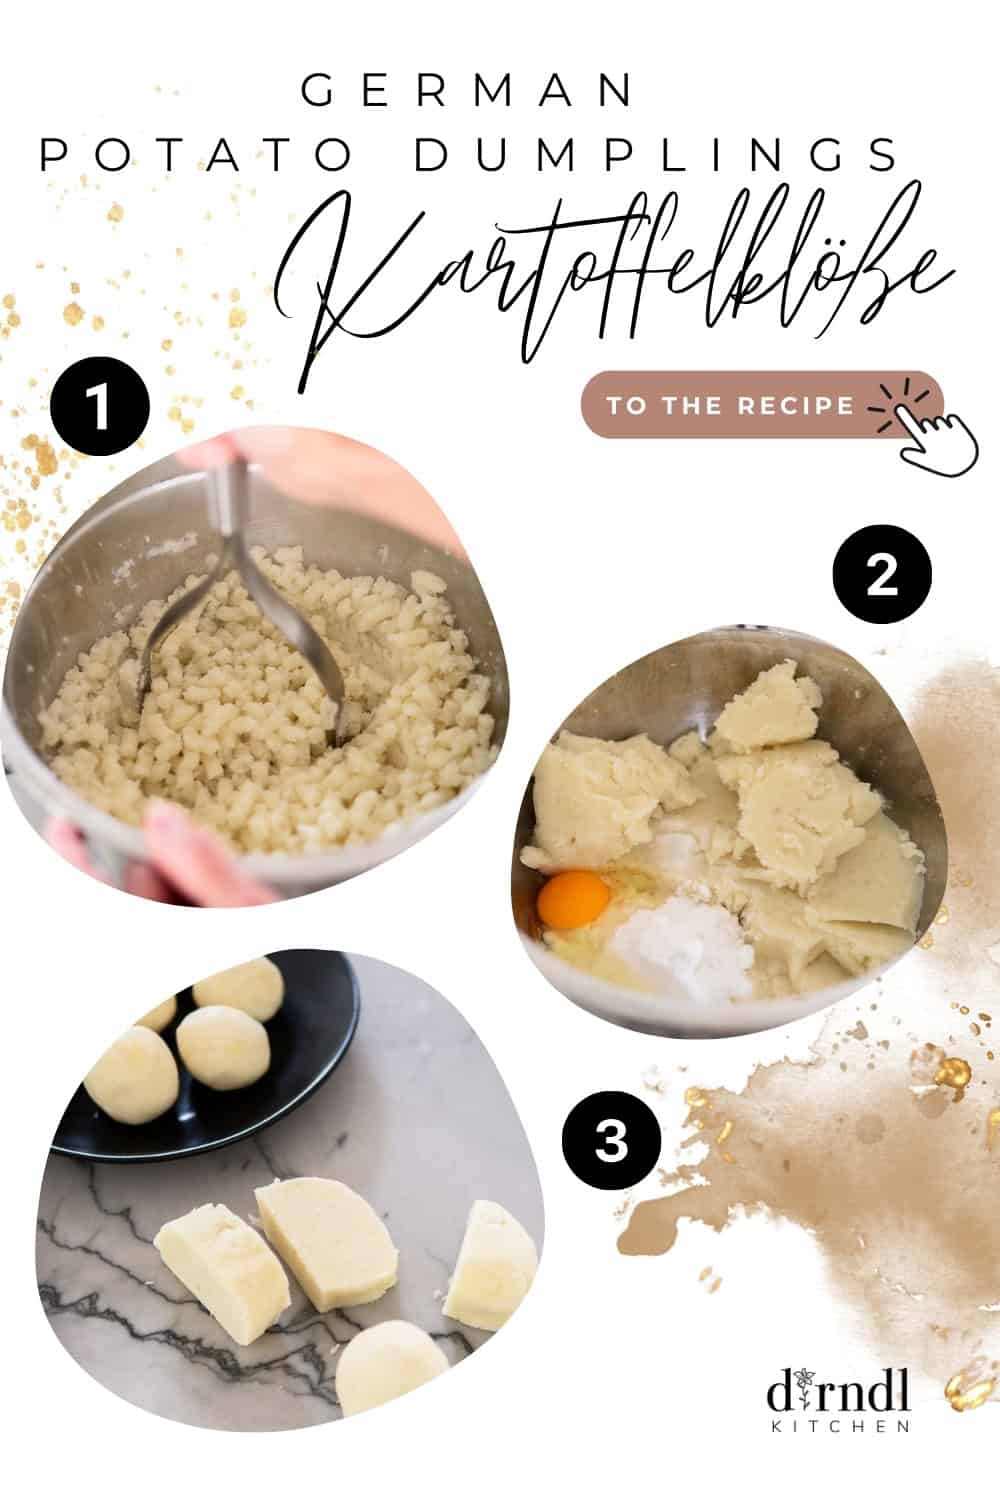 Step-by-step instructions image for making German potato dumplings.